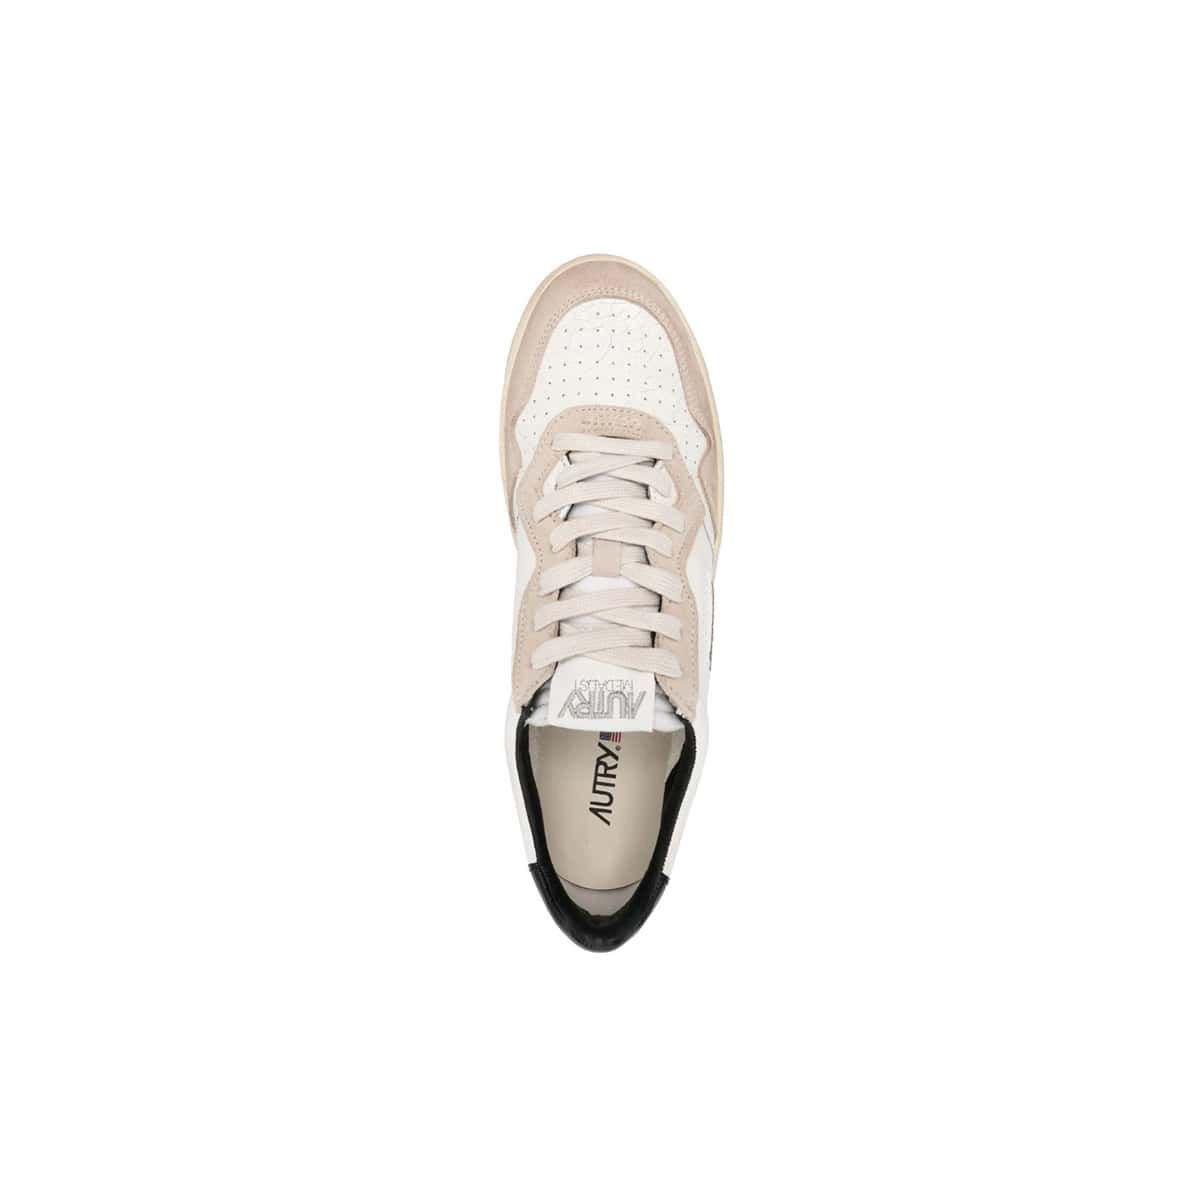 Medalist Low Top Sneakers In White & Black Leather